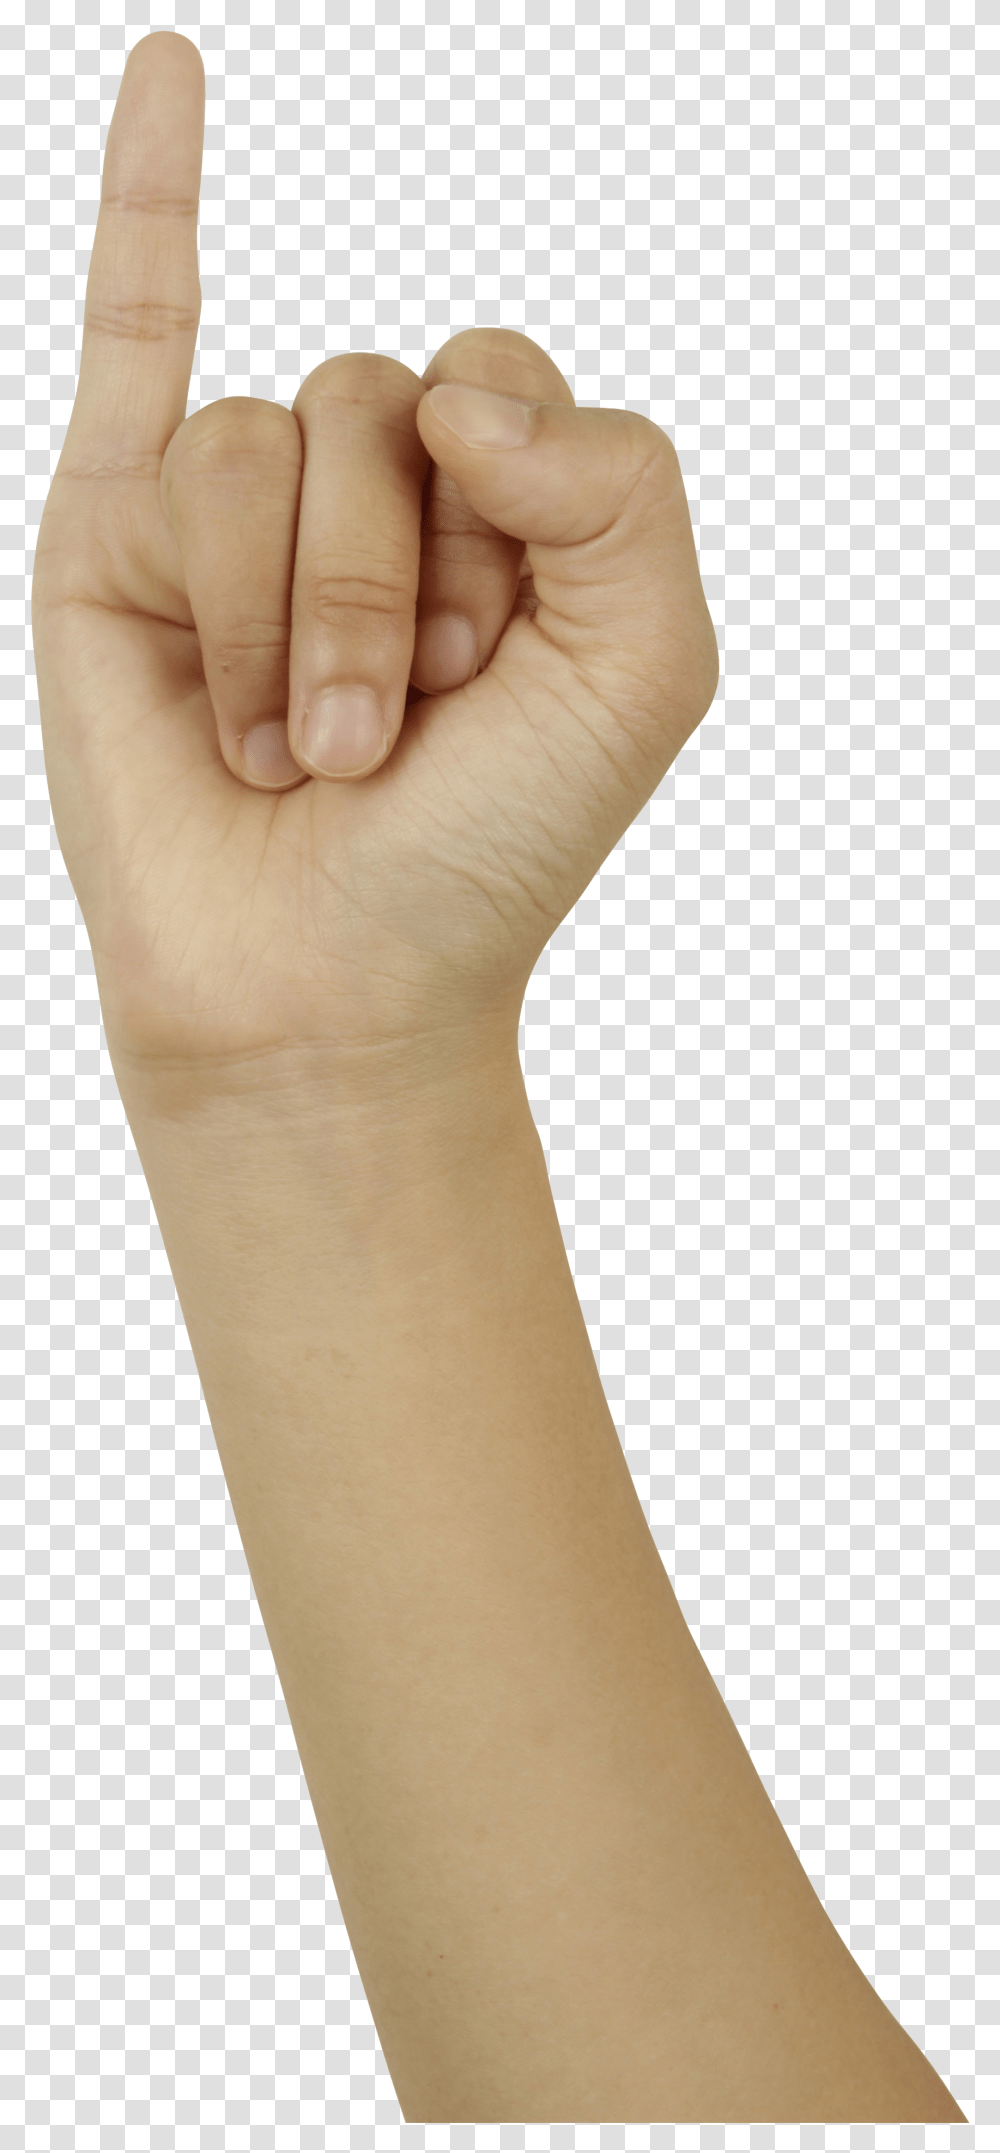 Download Pinky Finger Image For Free Pinky Finger Transparent Png